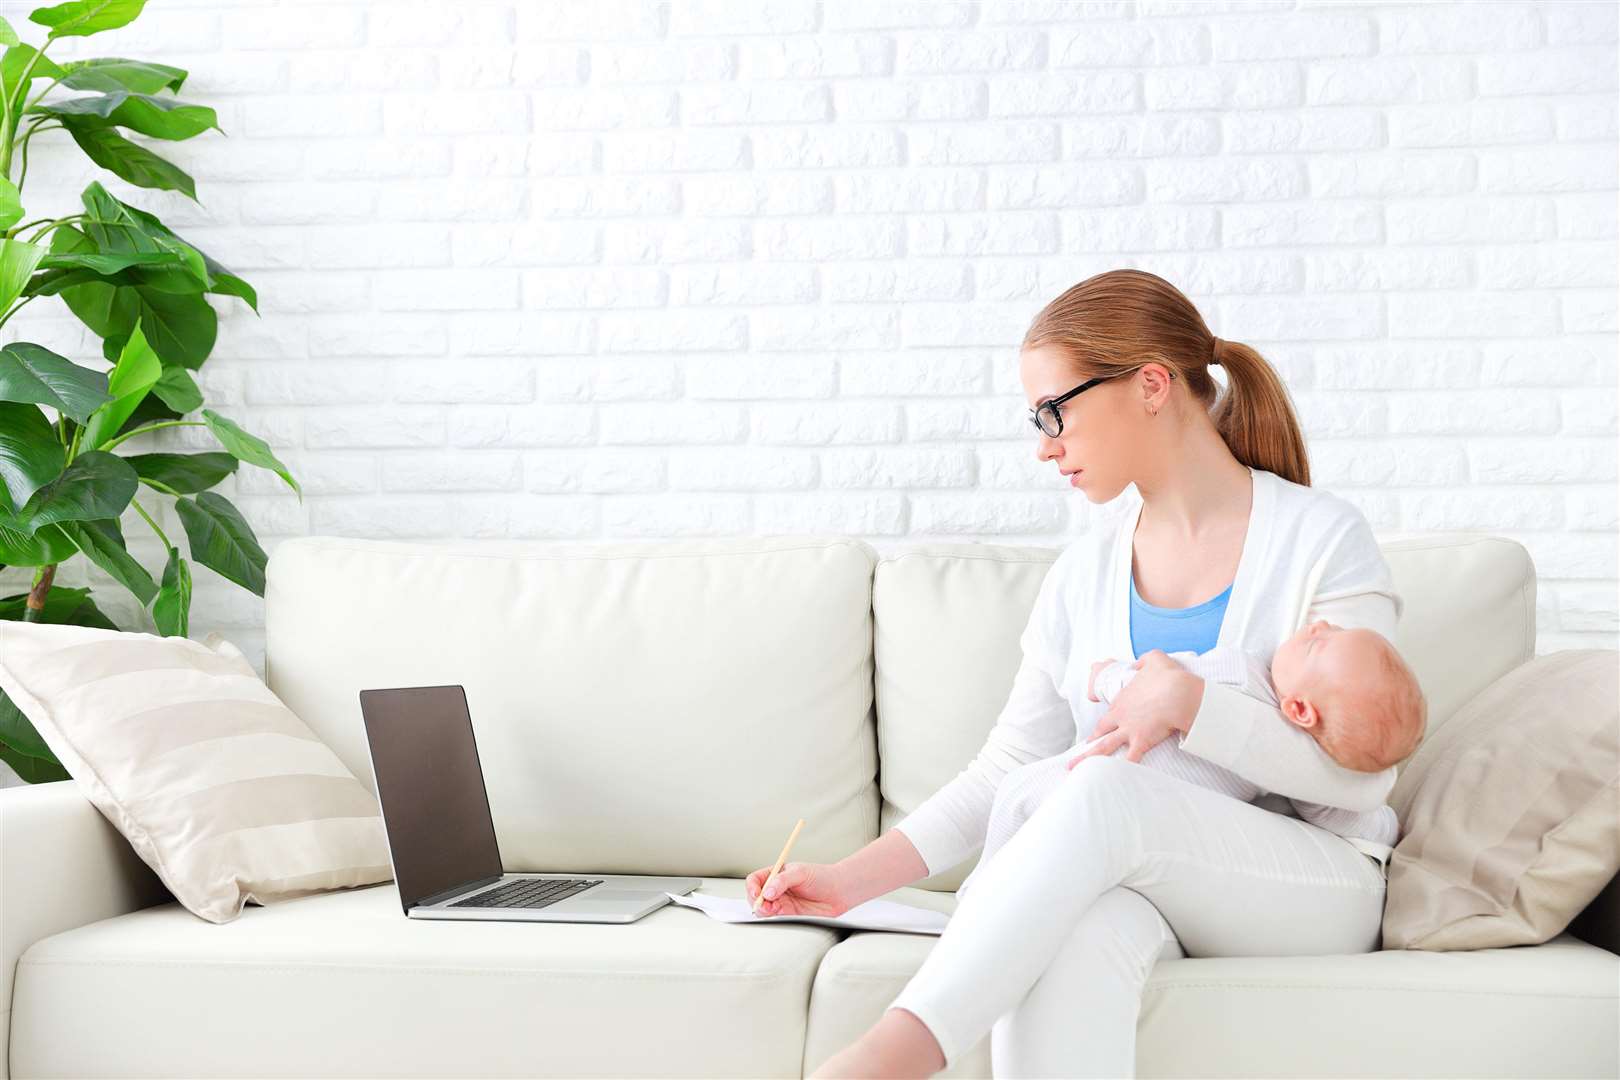 You can still be considered for promotion or a pay rise whilst on maternity leave